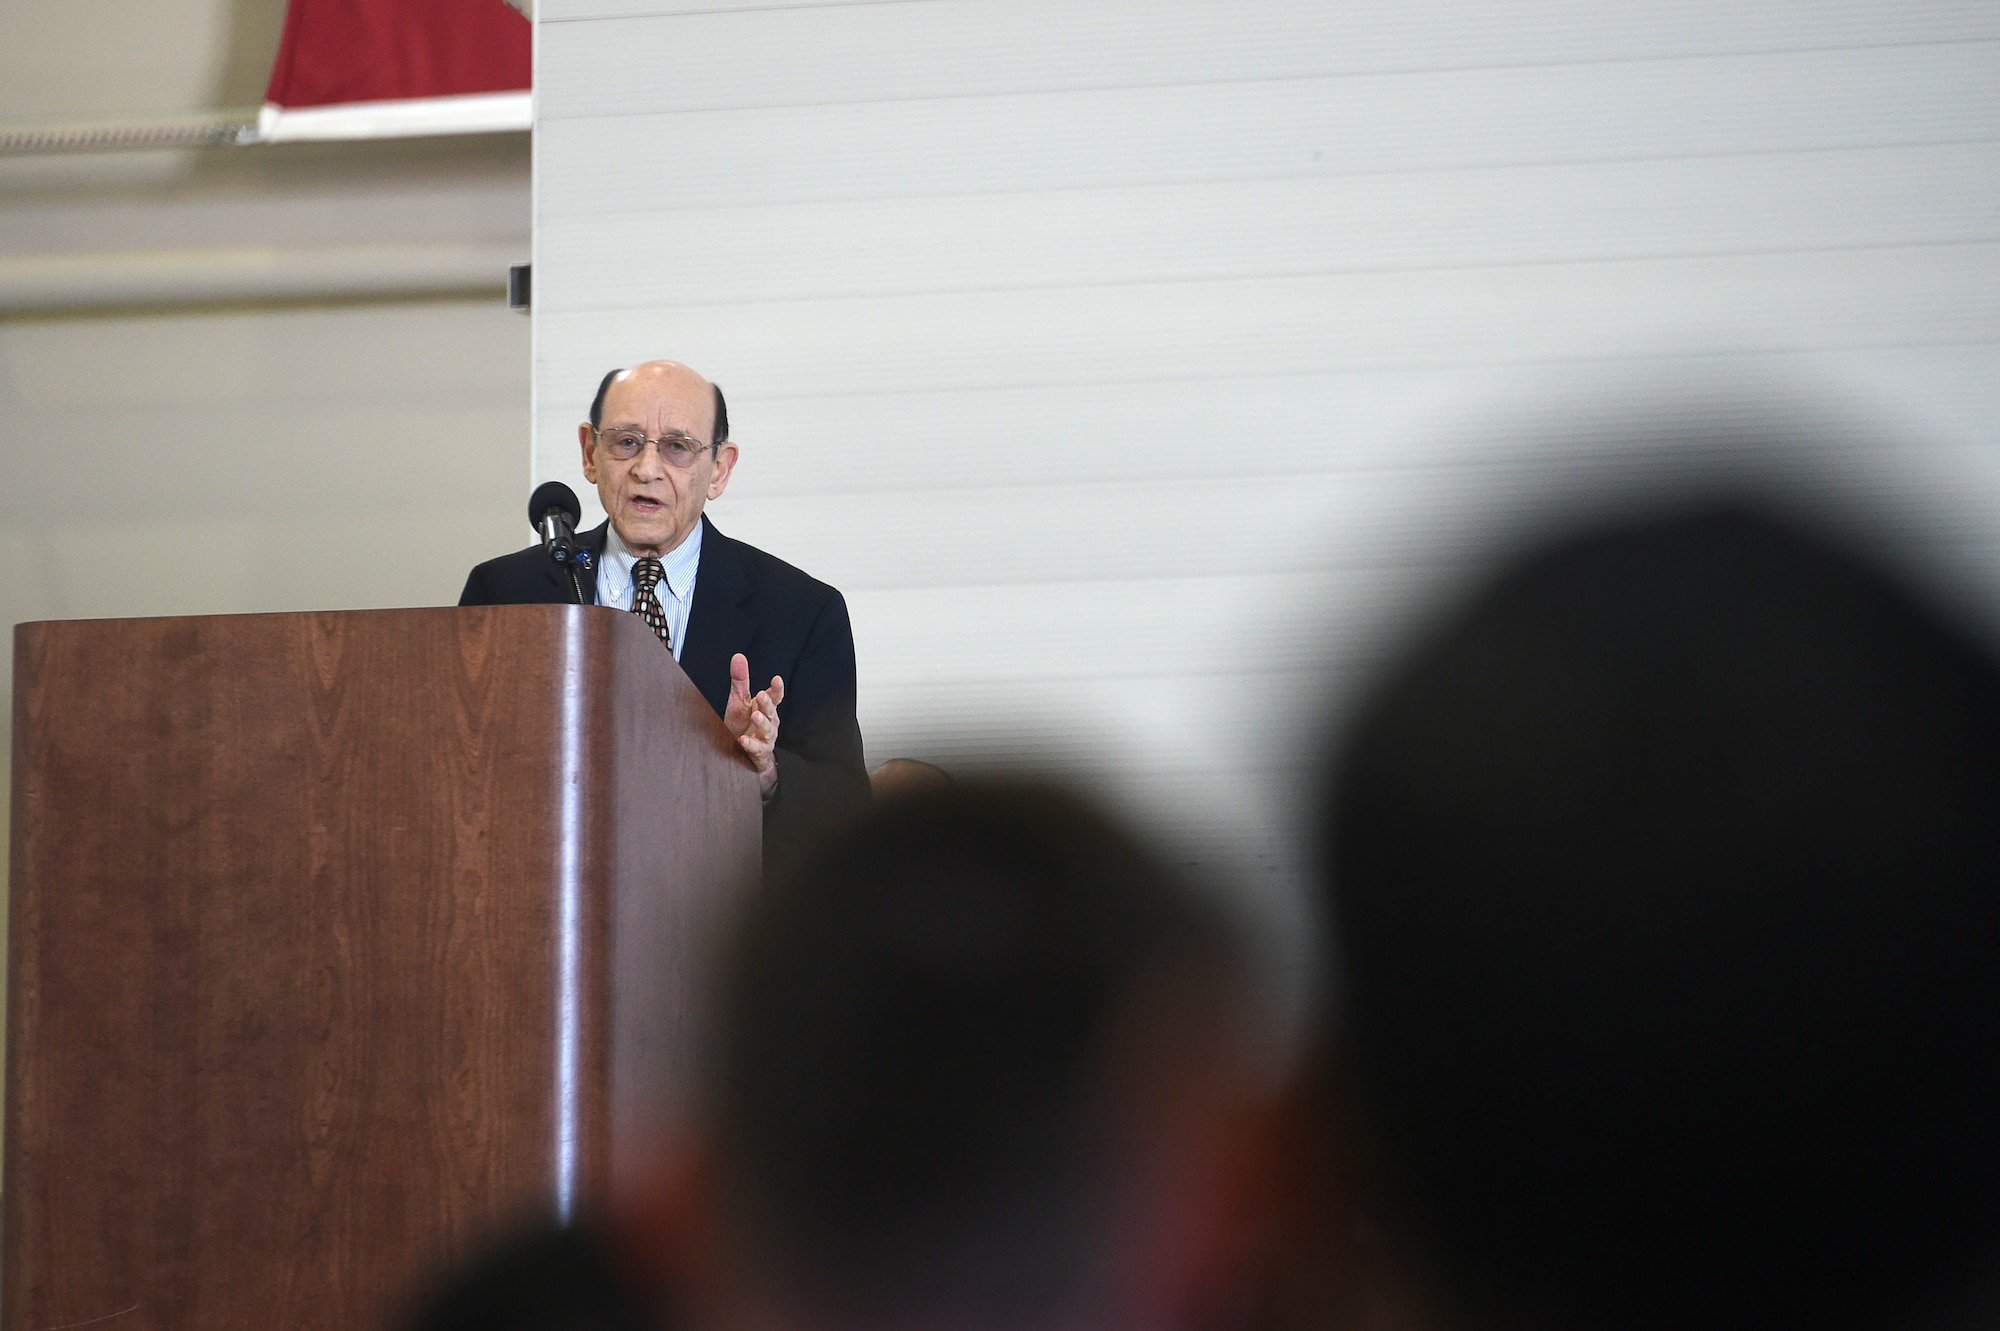 Mr. Abraham Karem, president of Karem Aircraft Incorporated, speaks during the MQ-1 Predator retirement ceremony March 9, 2018, at Creech Air Force Base, Nev. Karem is considered the “father” of the MQ-1 for having built an earlier model of what later evolved into the MQ-1 in his home garage. (U.S. Air Force photo by Senior Airman James Thompson)